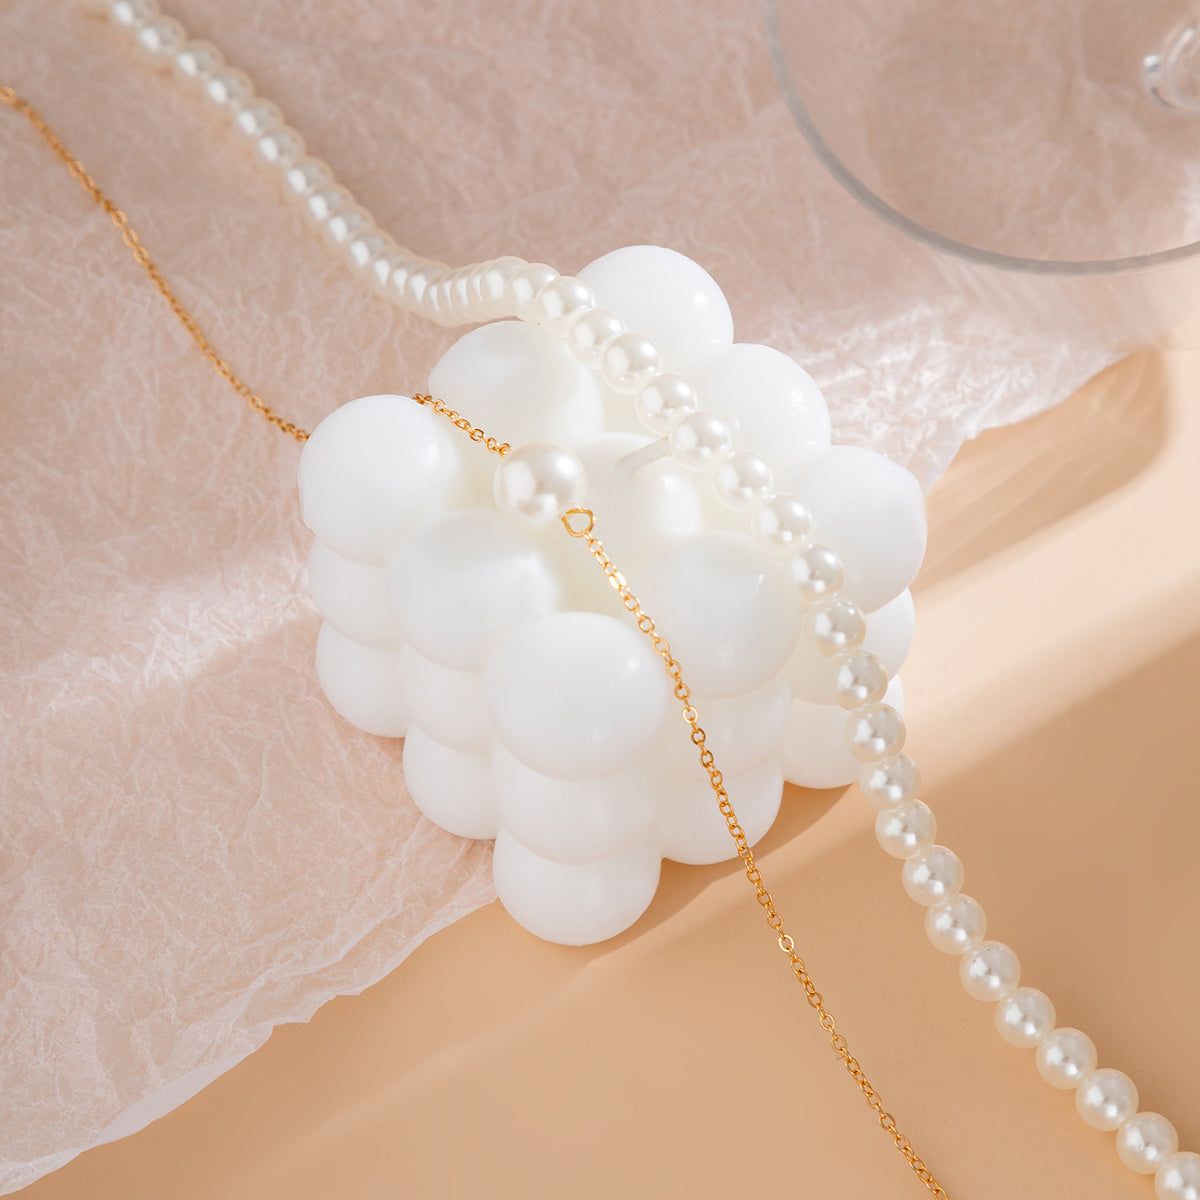 Gorgeous 2-Piece Pearl Necklace Set - Perfect for Women!